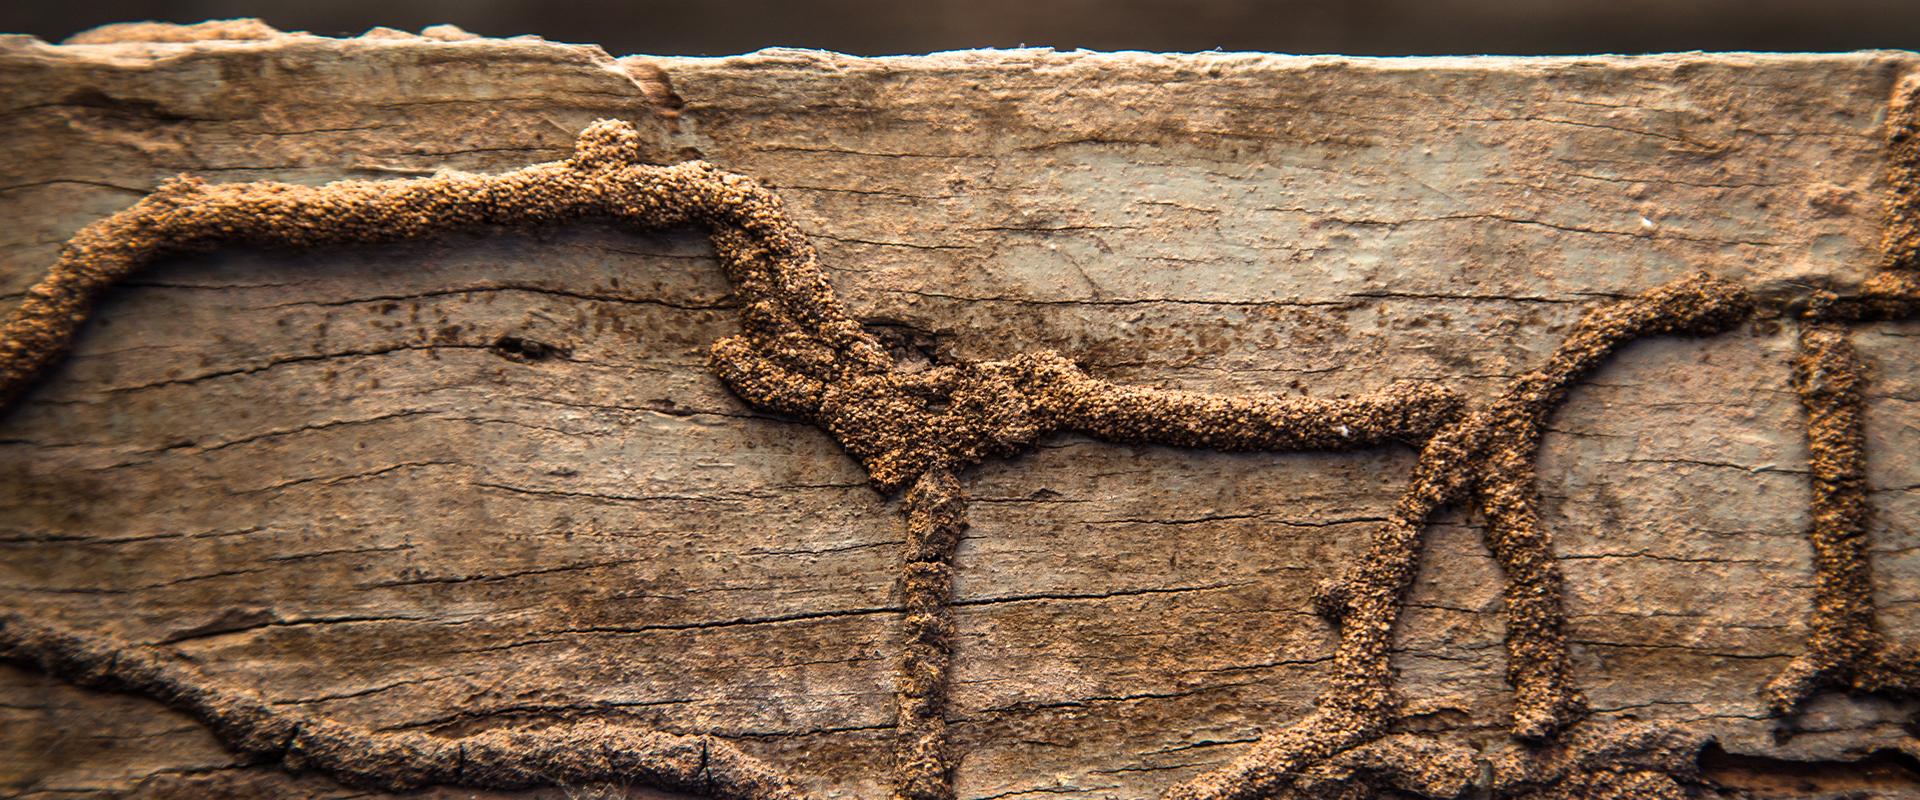 lines of termite tunnels on wood